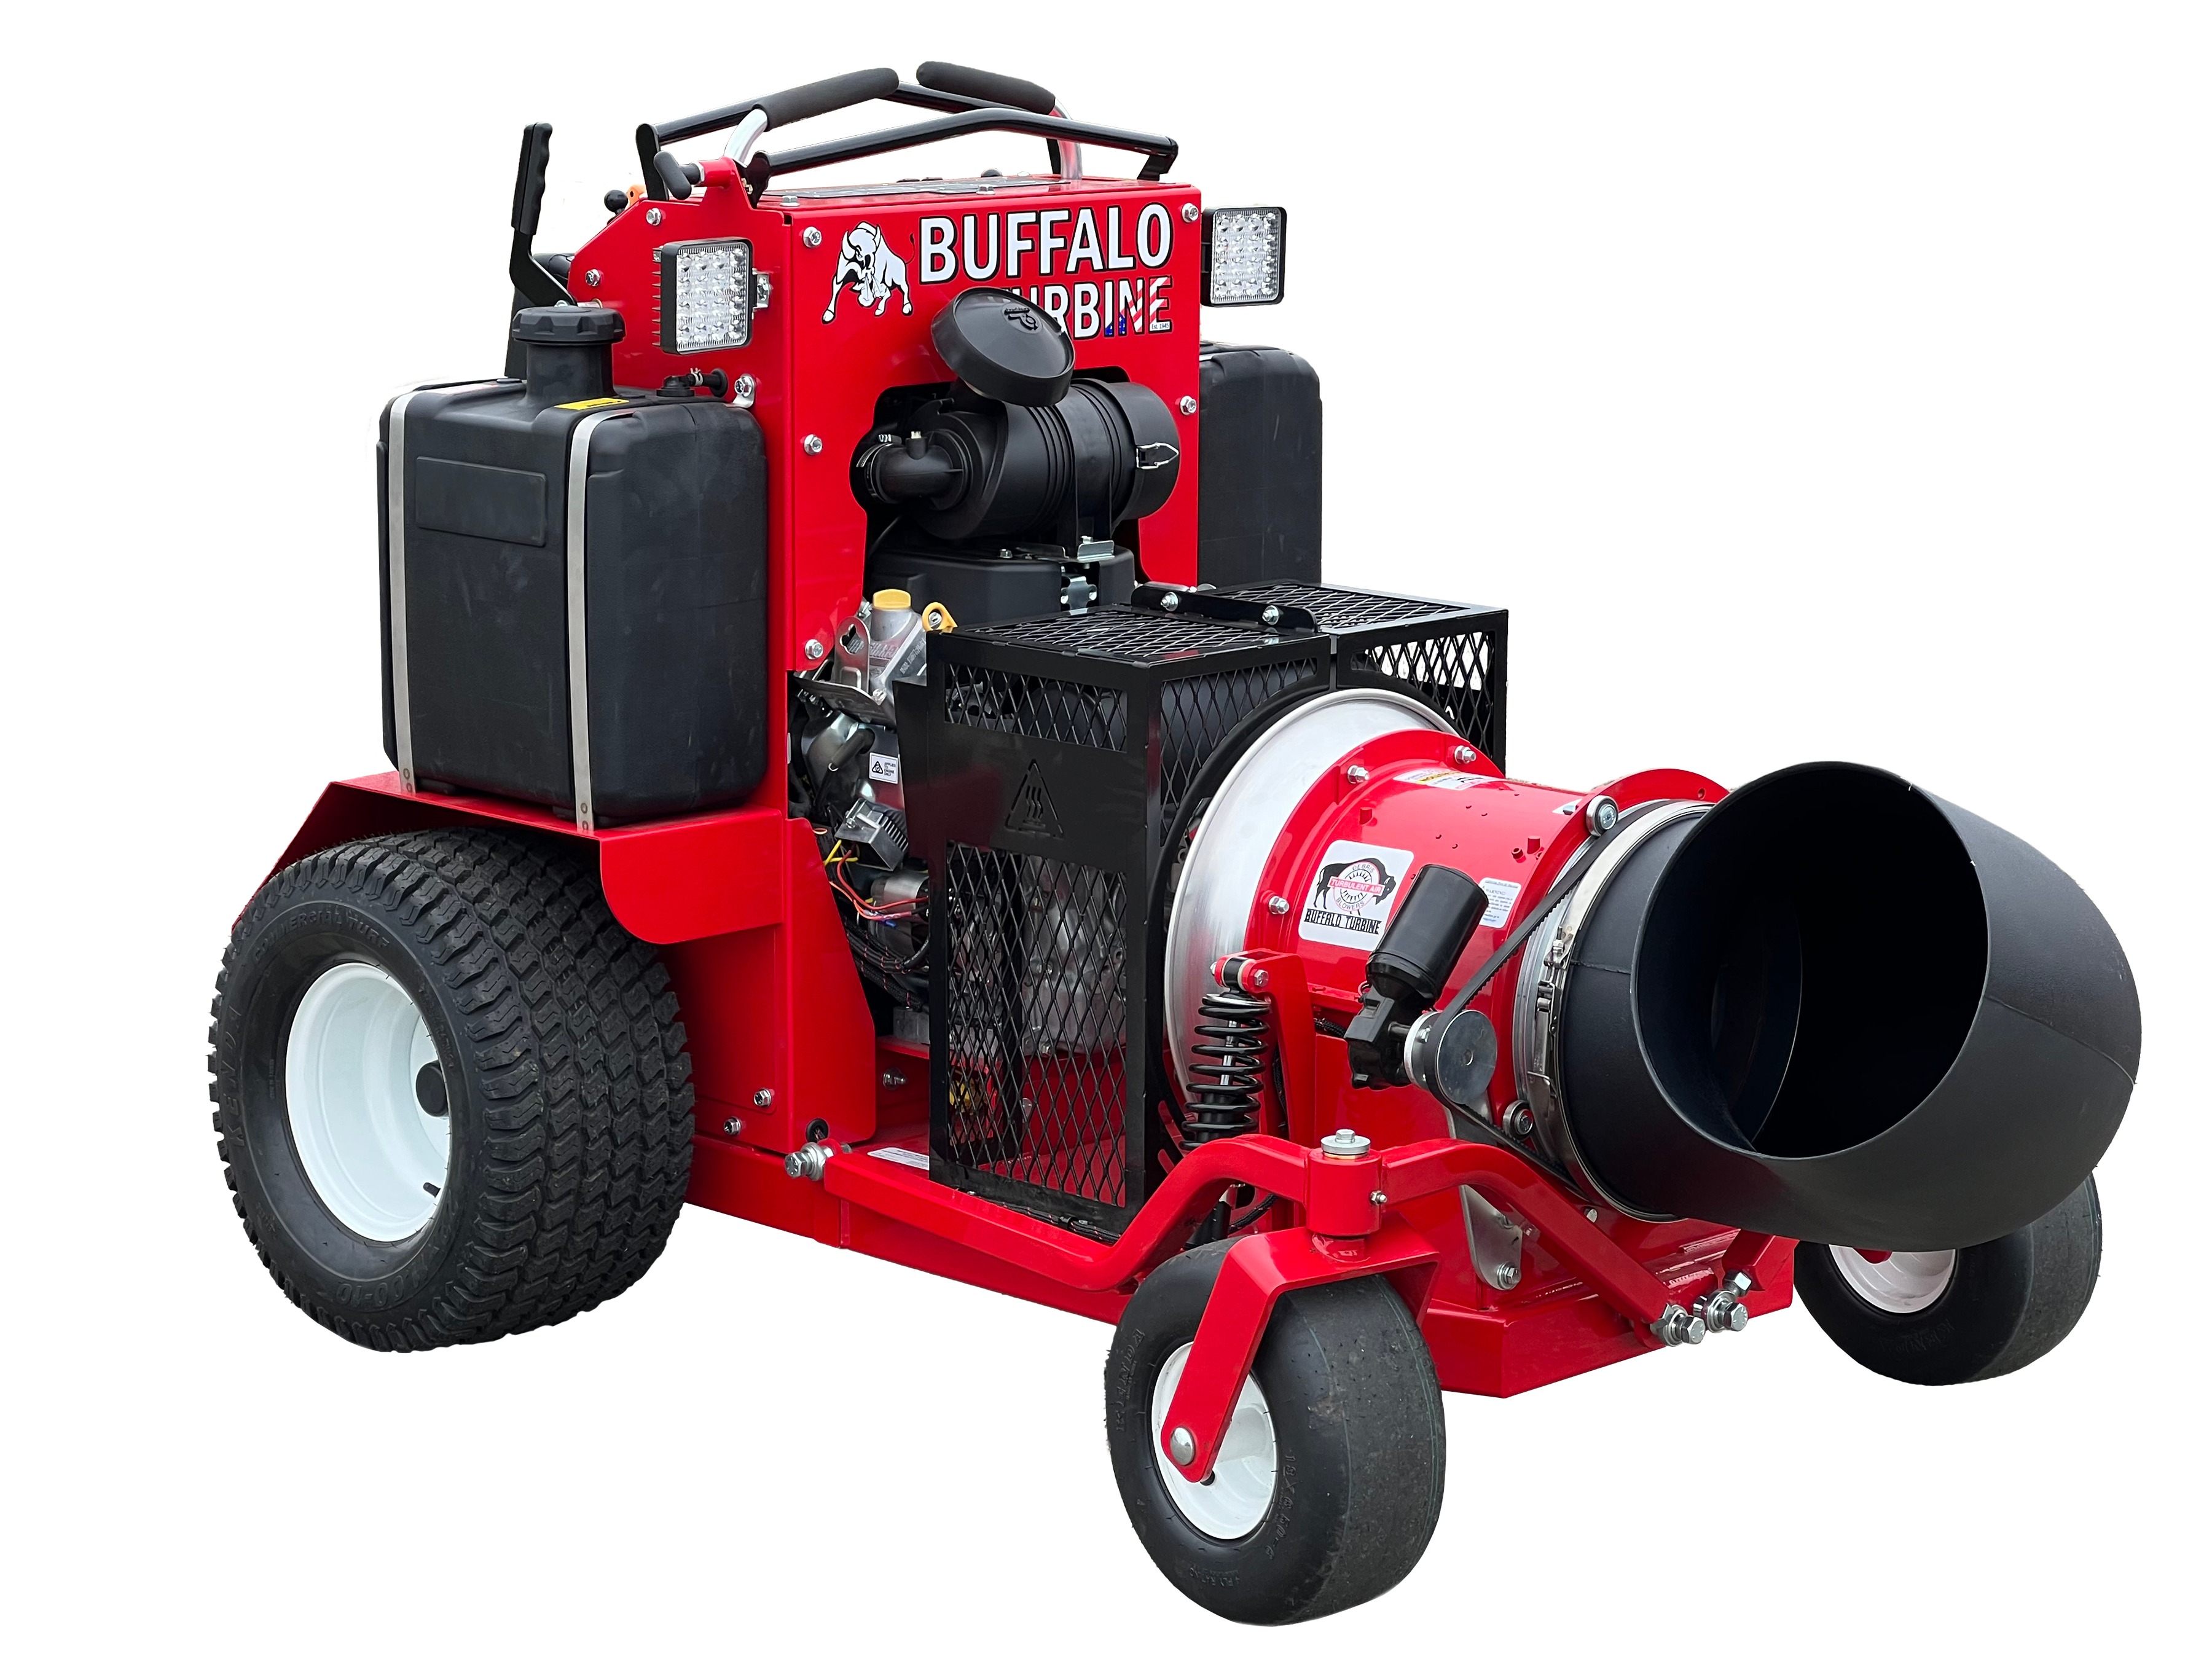 Introducing the Buffalo Turbine Blitz Stand-On Debris Blower: Redefining Efficiency and Operator Comfort. 116